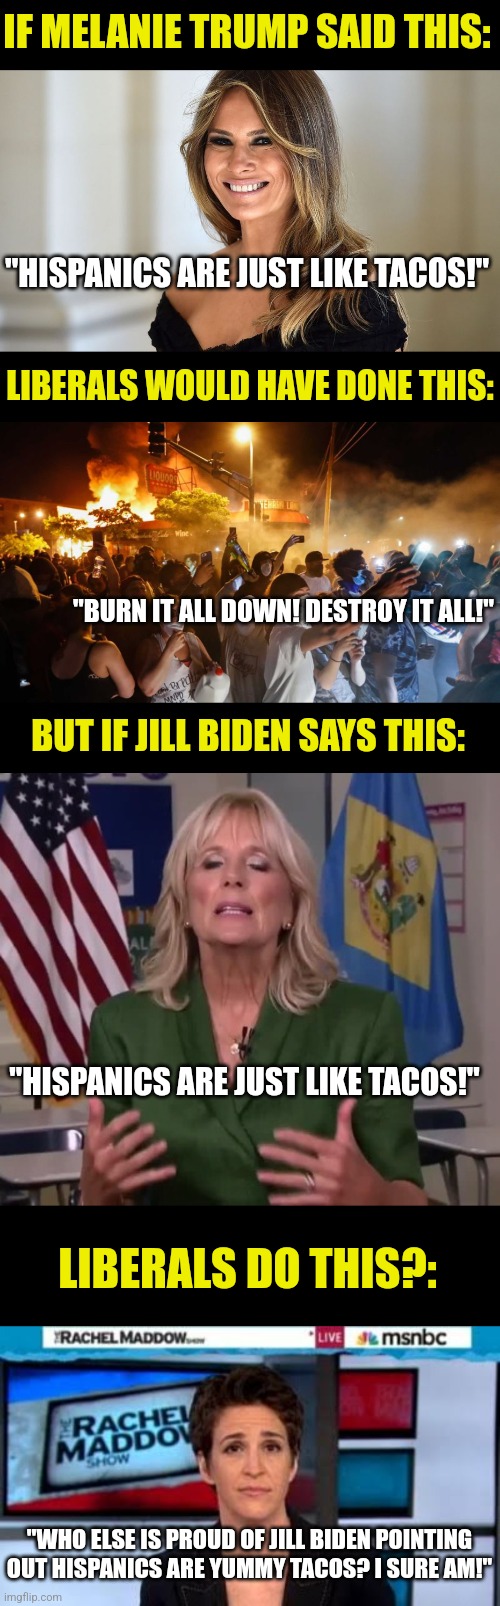 So racism does or does not exist liberals? I can't rely on your reactions. So just tell us, does it exist or not???? | IF MELANIE TRUMP SAID THIS:; "HISPANICS ARE JUST LIKE TACOS!"; LIBERALS WOULD HAVE DONE THIS:; "BURN IT ALL DOWN! DESTROY IT ALL!"; BUT IF JILL BIDEN SAYS THIS:; "HISPANICS ARE JUST LIKE TACOS!"; LIBERALS DO THIS?:; "WHO ELSE IS PROUD OF JILL BIDEN POINTING OUT HISPANICS ARE YUMMY TACOS? I SURE AM!" | image tagged in melanie trump,riotersnodistancing,jill biden,msnbc news,taco,liberal hypocrisy | made w/ Imgflip meme maker